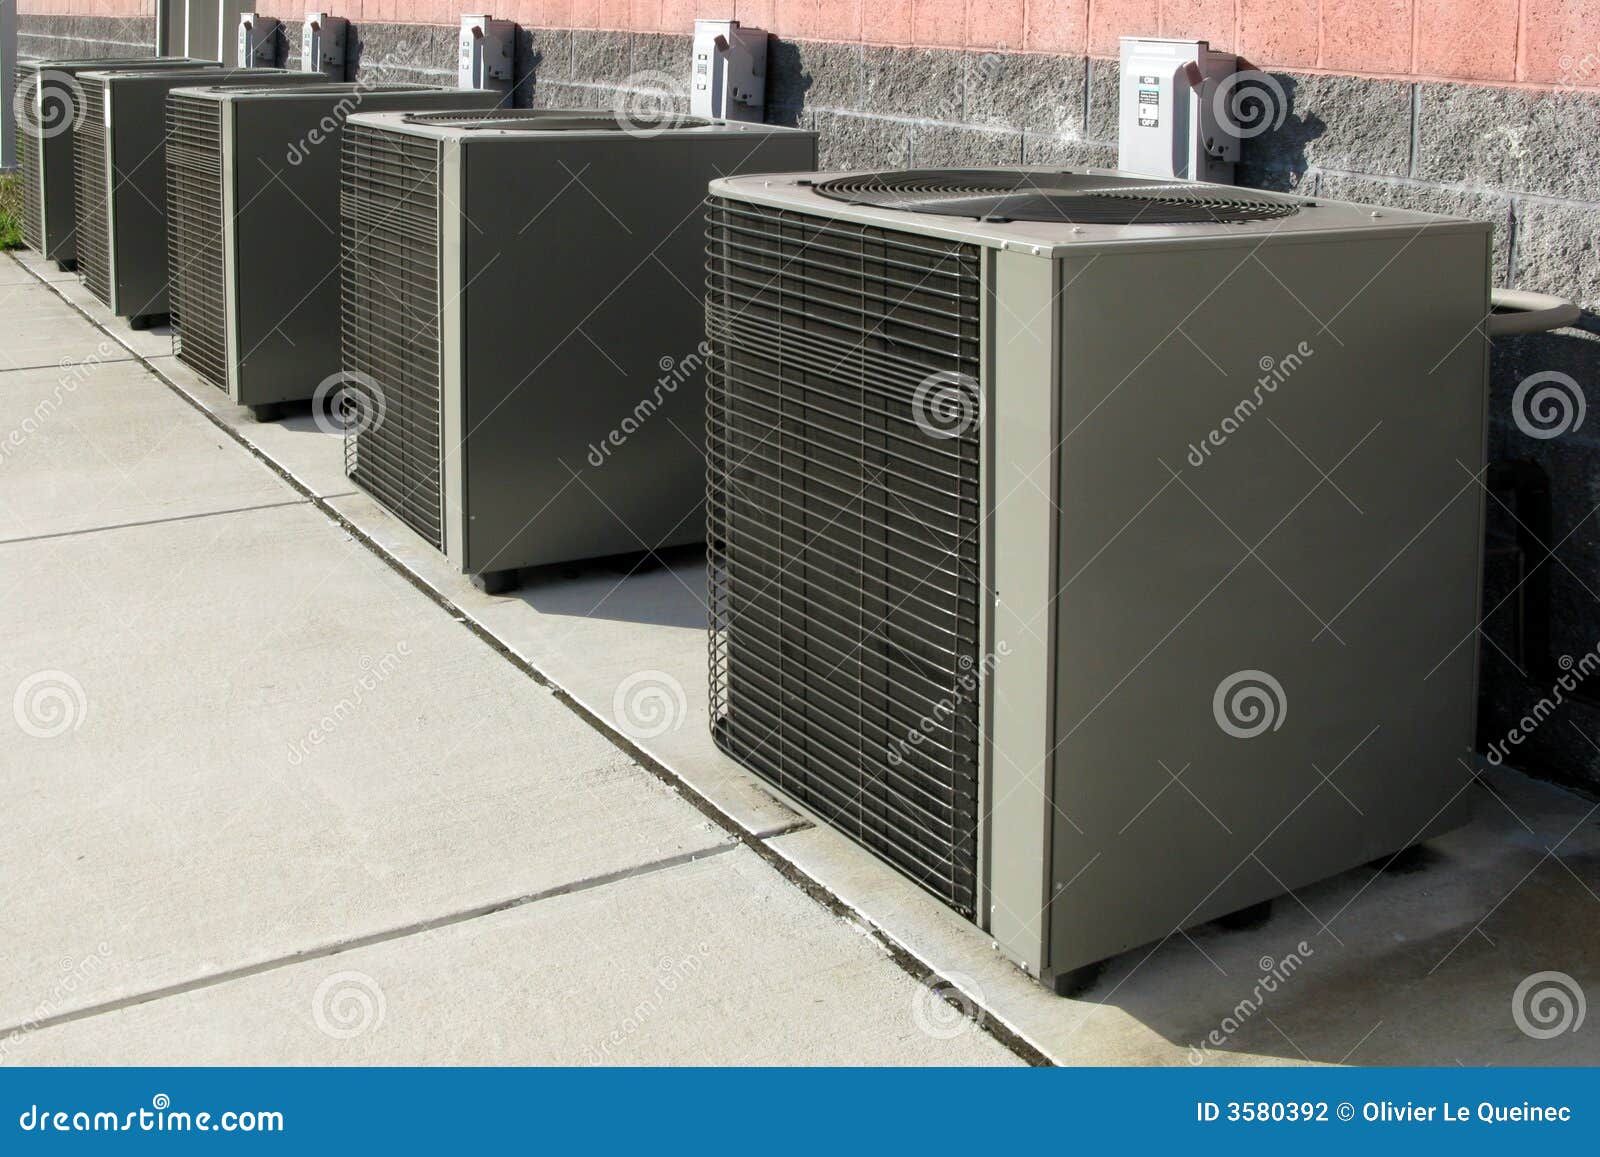 air conditioner compressor ac cooling system units stock